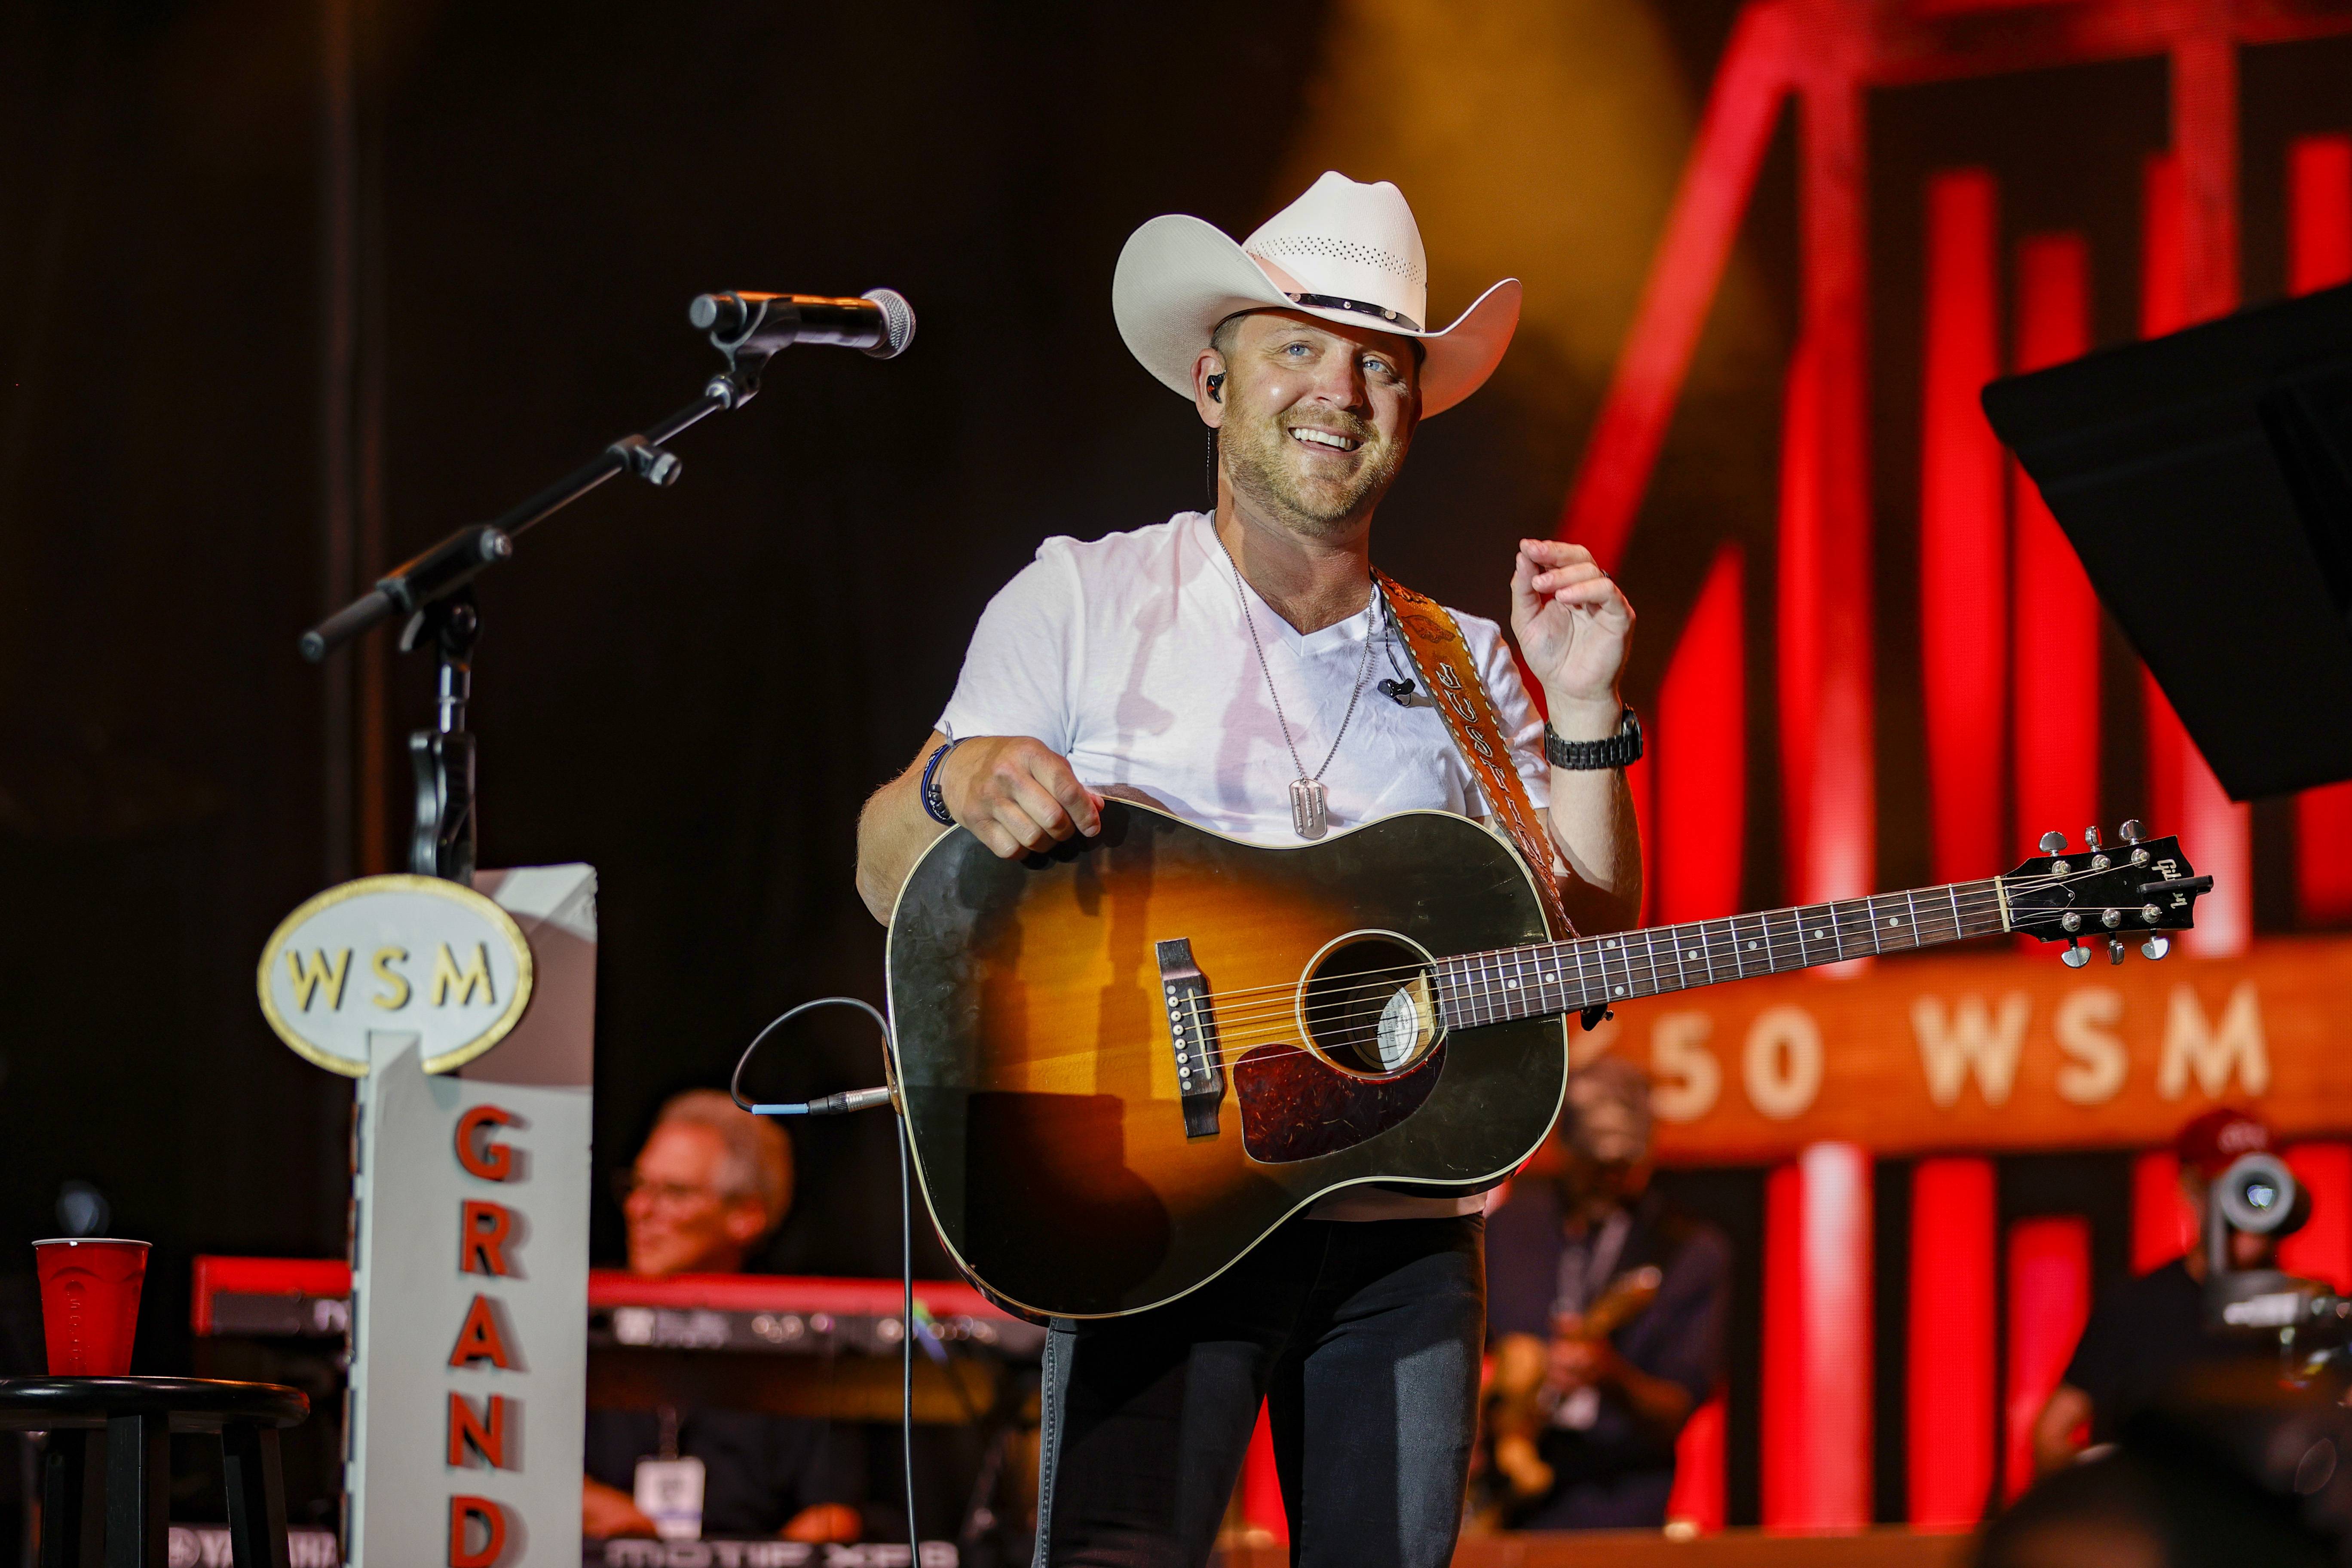 NASHVILLE, TENNESSEE - AUGUST 08: Justin Moore performs onstage during the 2021 Big Machine Music City Grand Prix on August 08, 2021 in Nashville, Tennessee. 